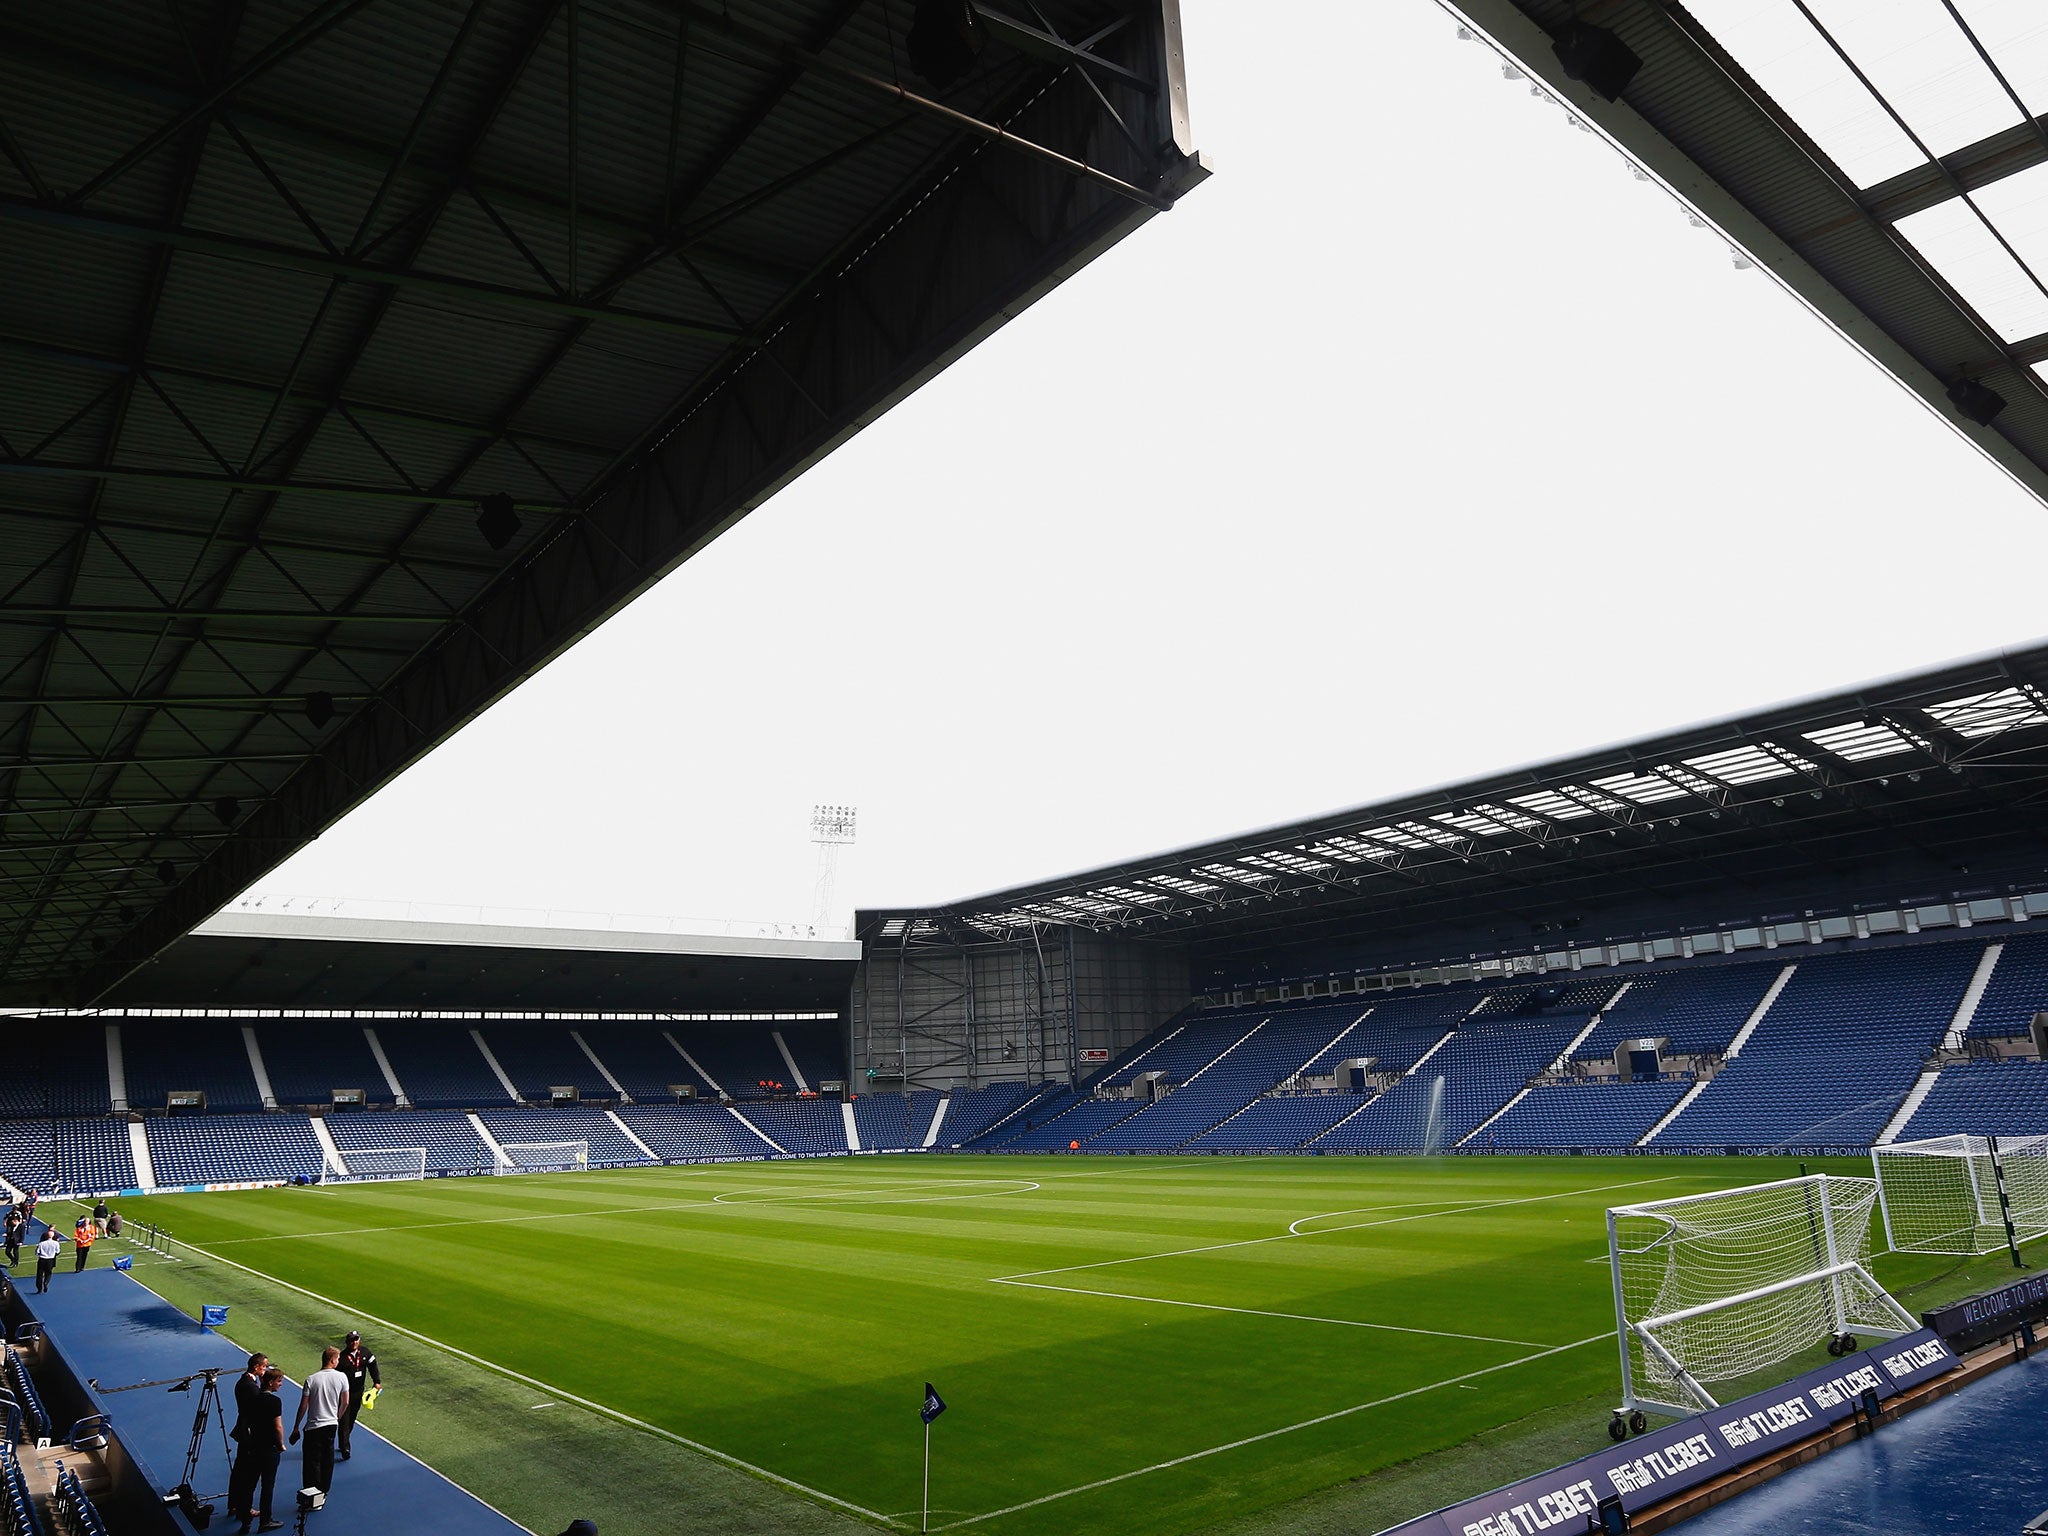 A view of The Hawthorns